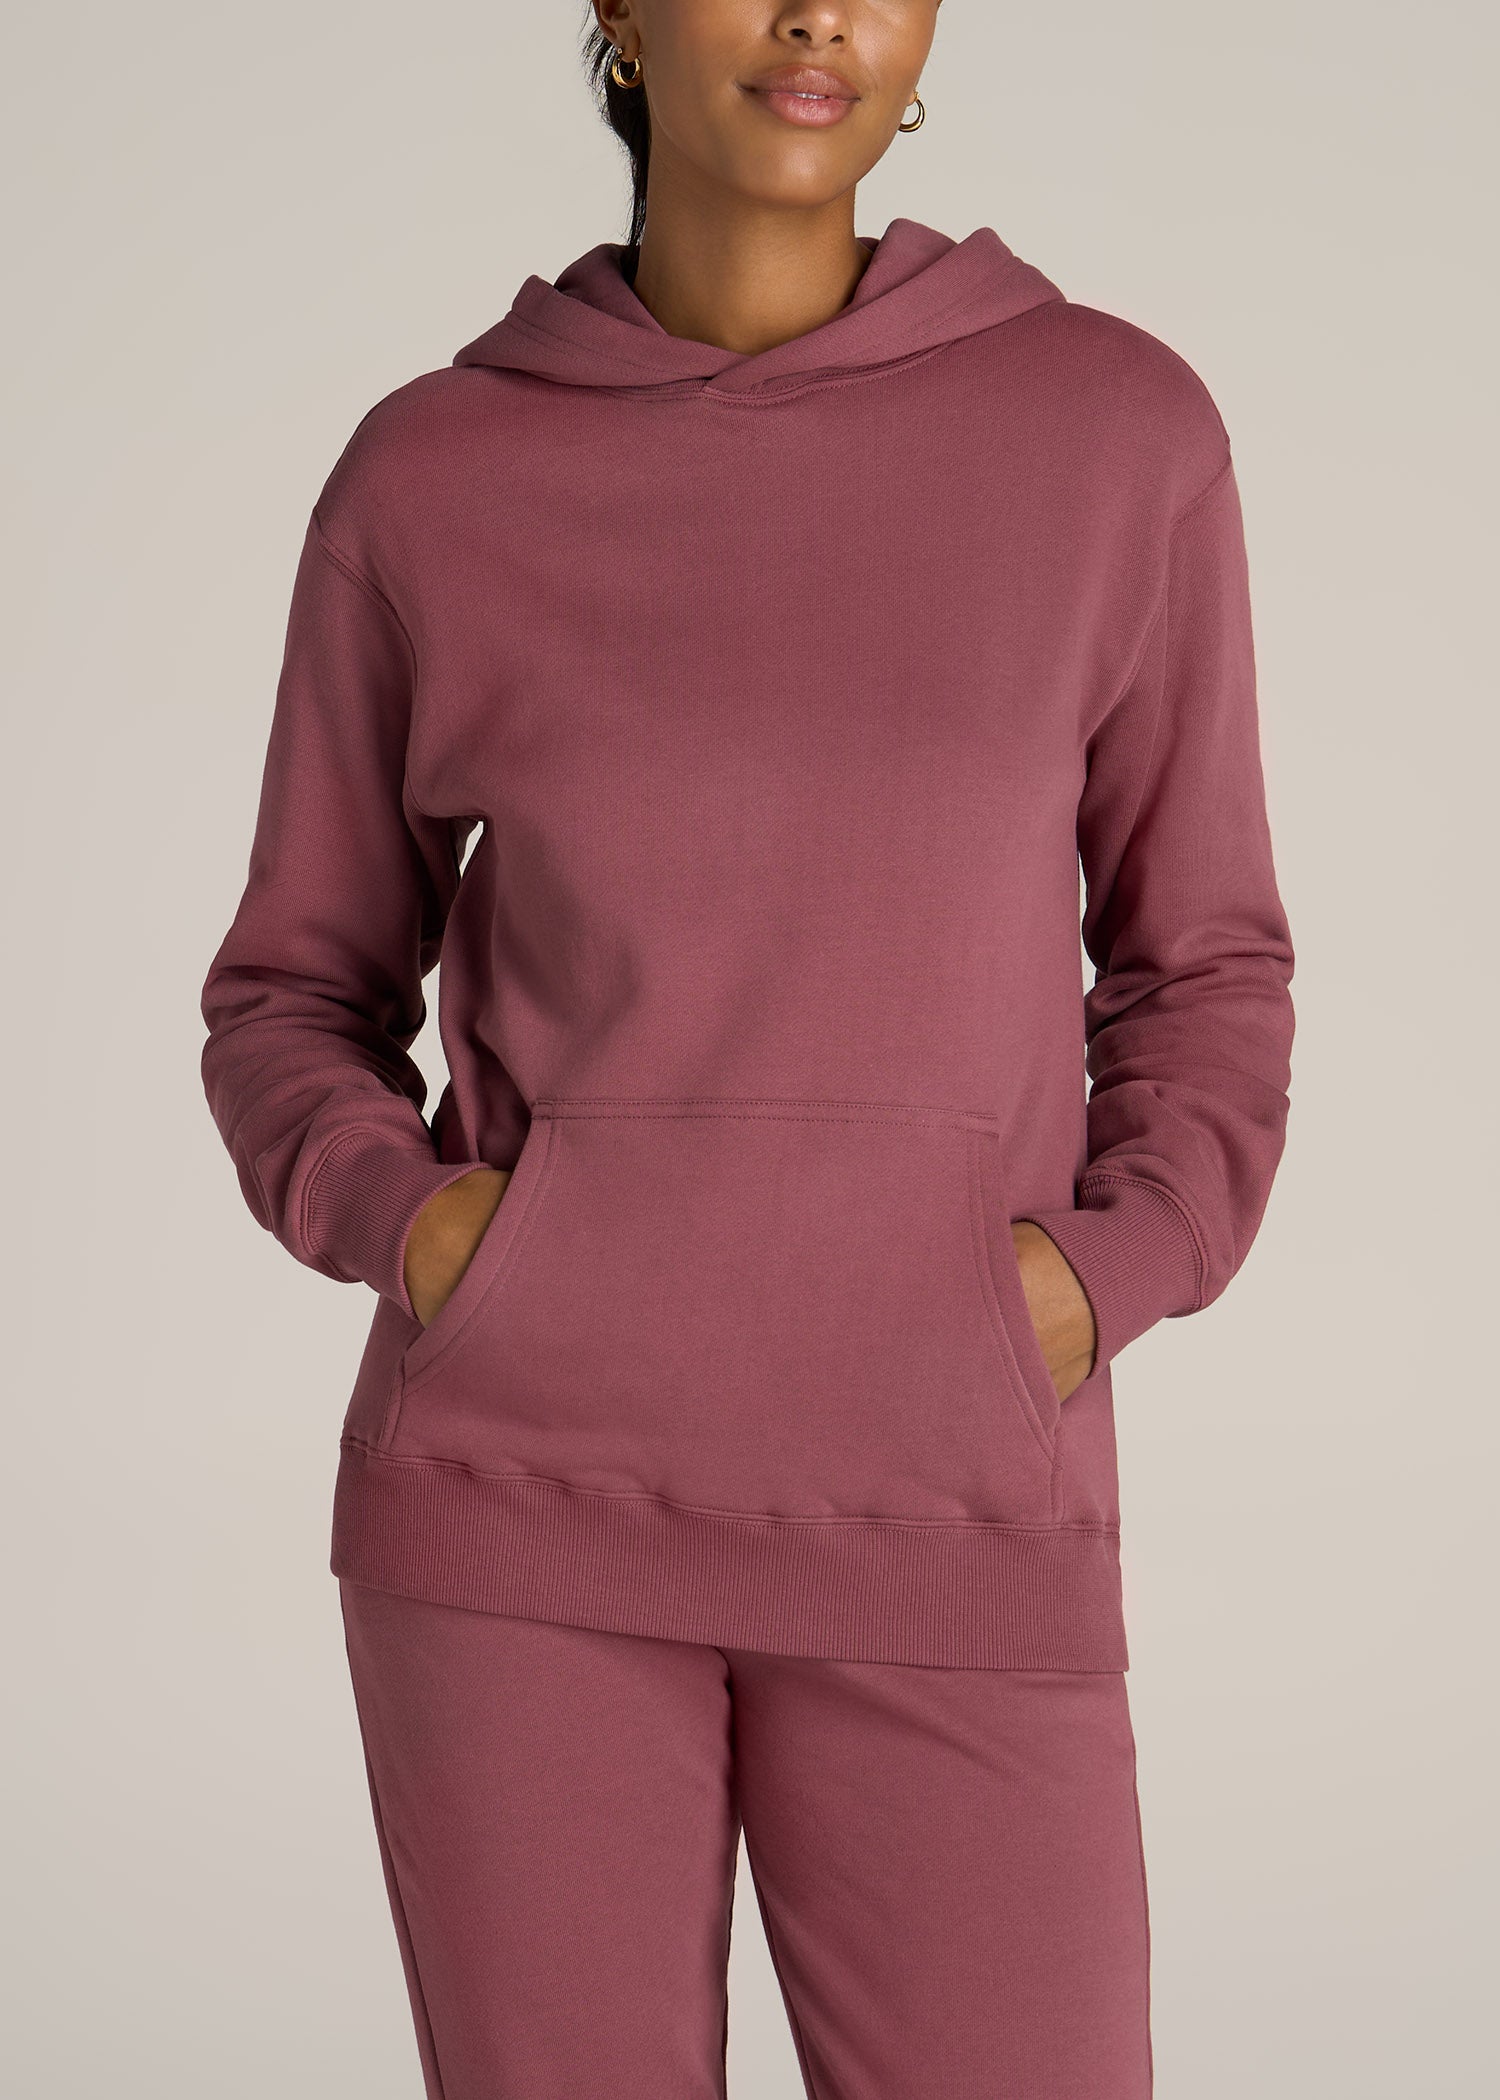 Wearever Relaxed Fit Women's Tall Hoodie